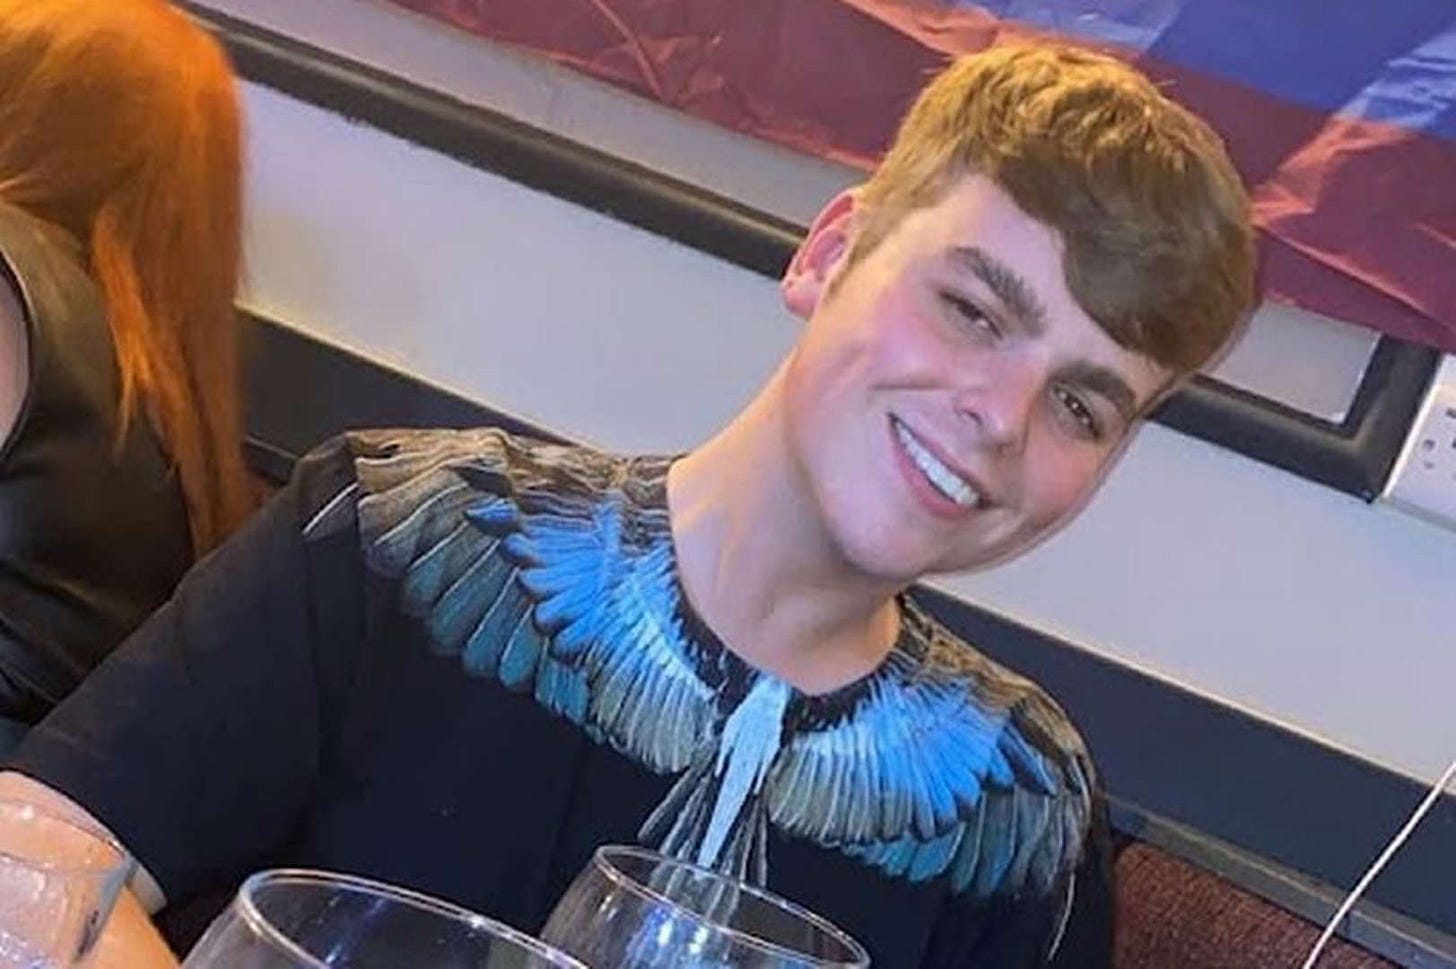 Hundreds have paid tribute to Loughlan Brown on social media